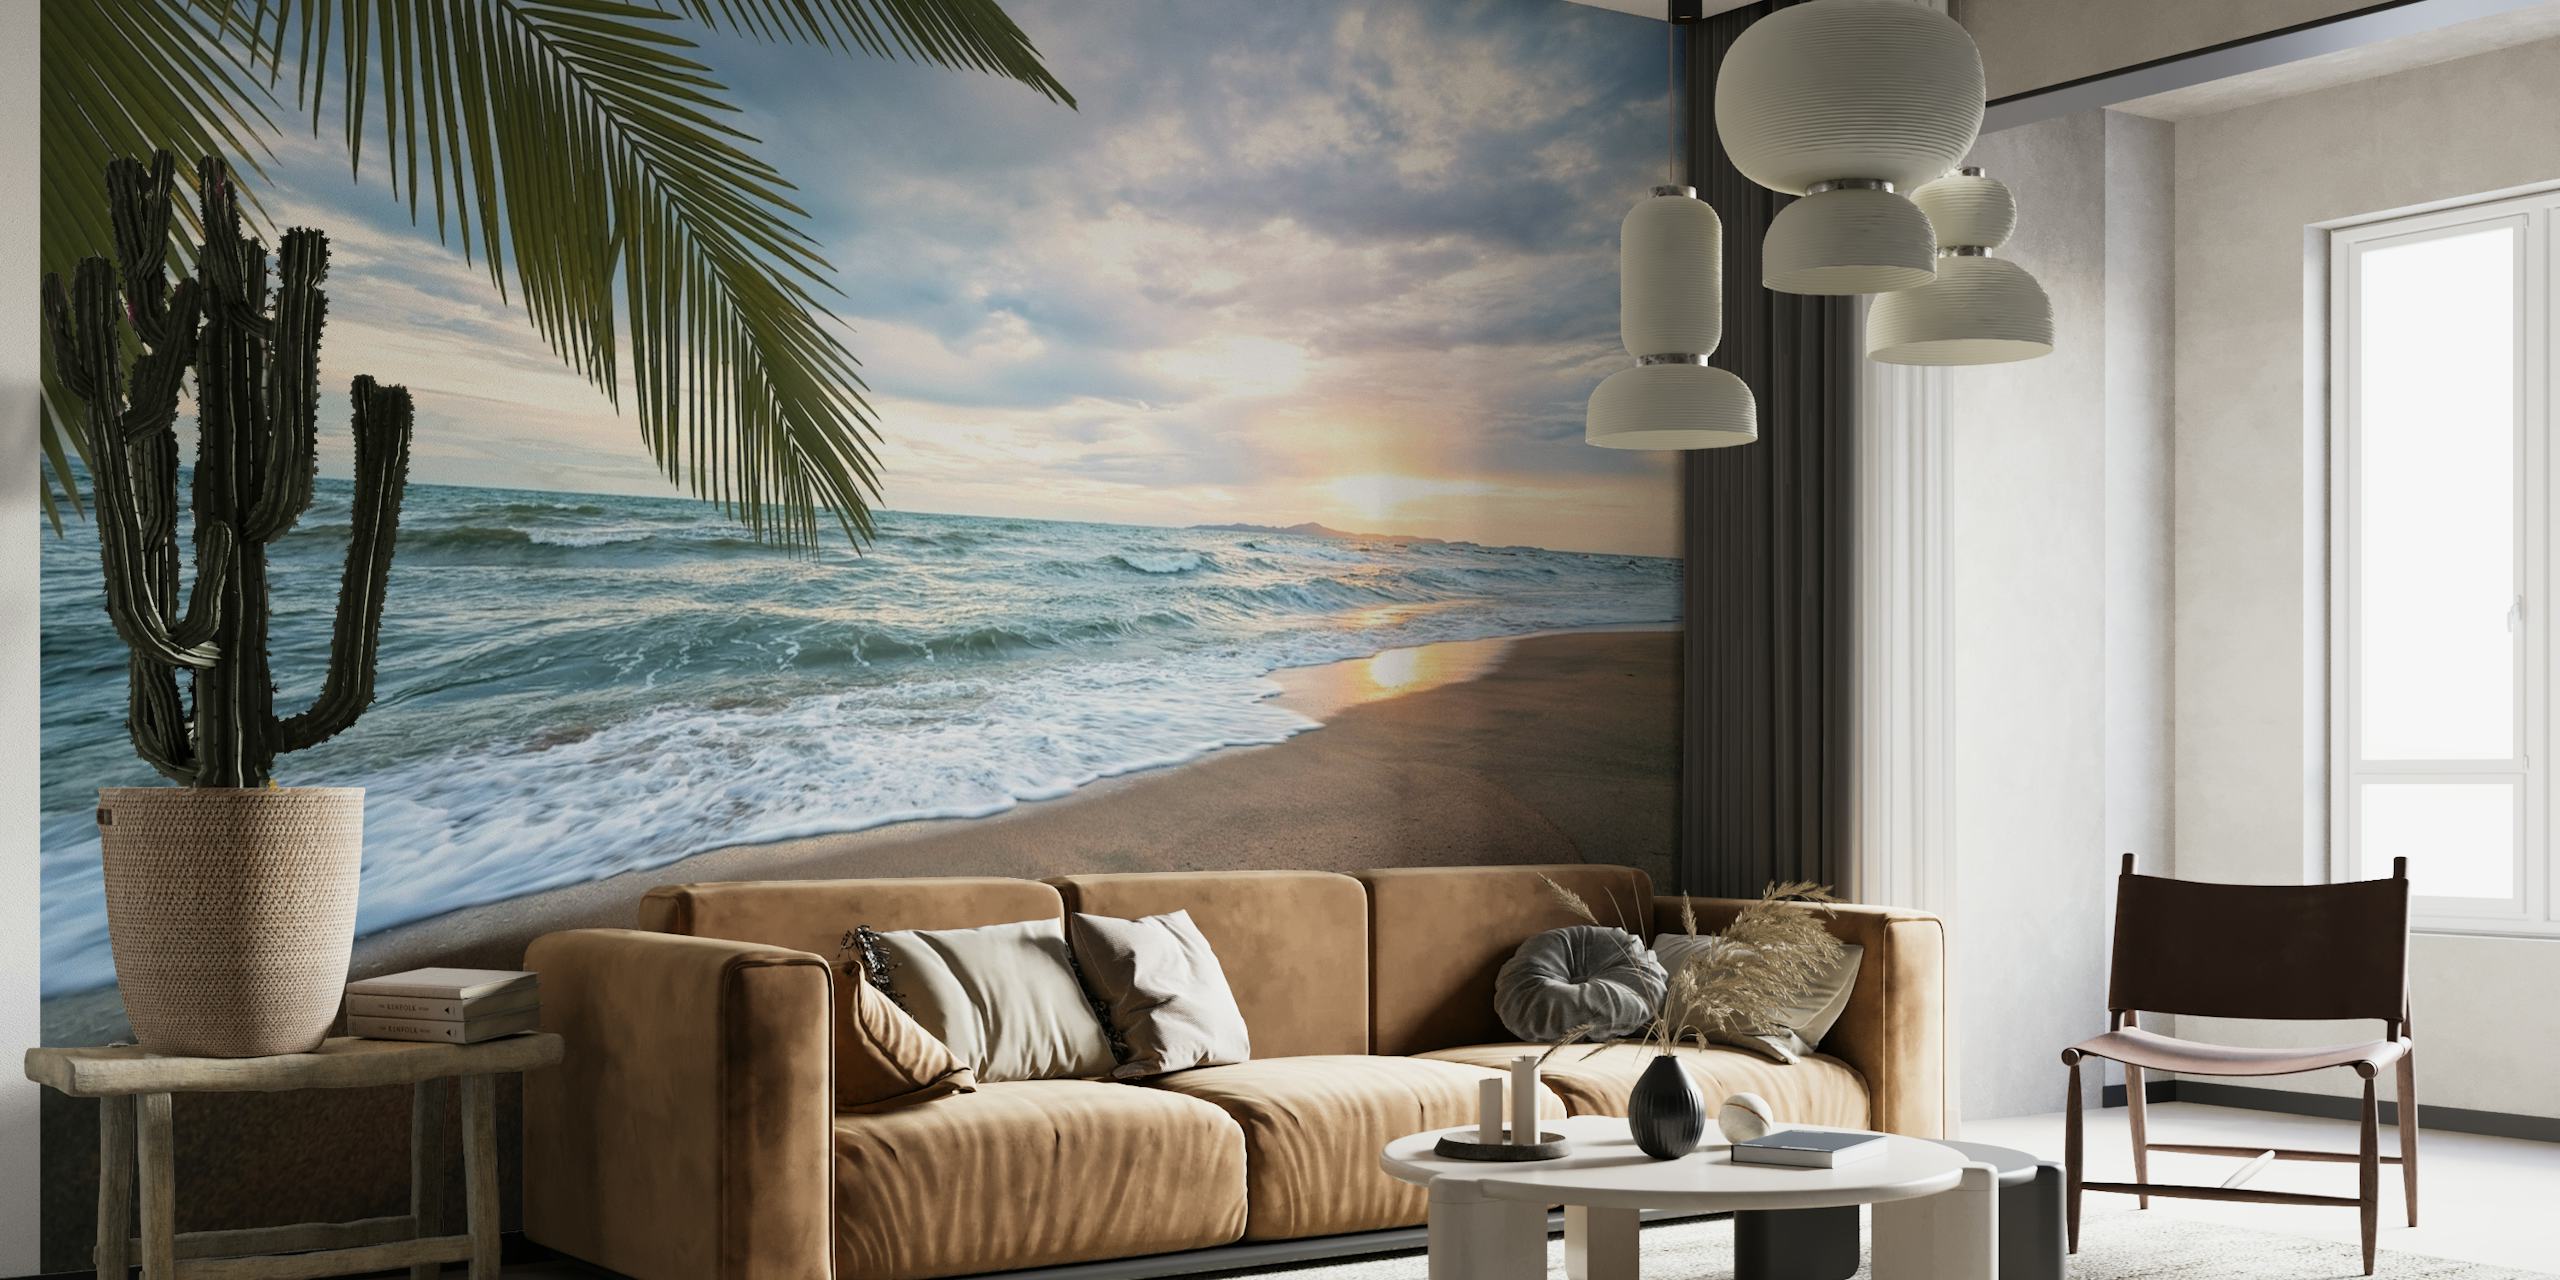 Thai beach sunset wall mural with palm trees and ocean waves